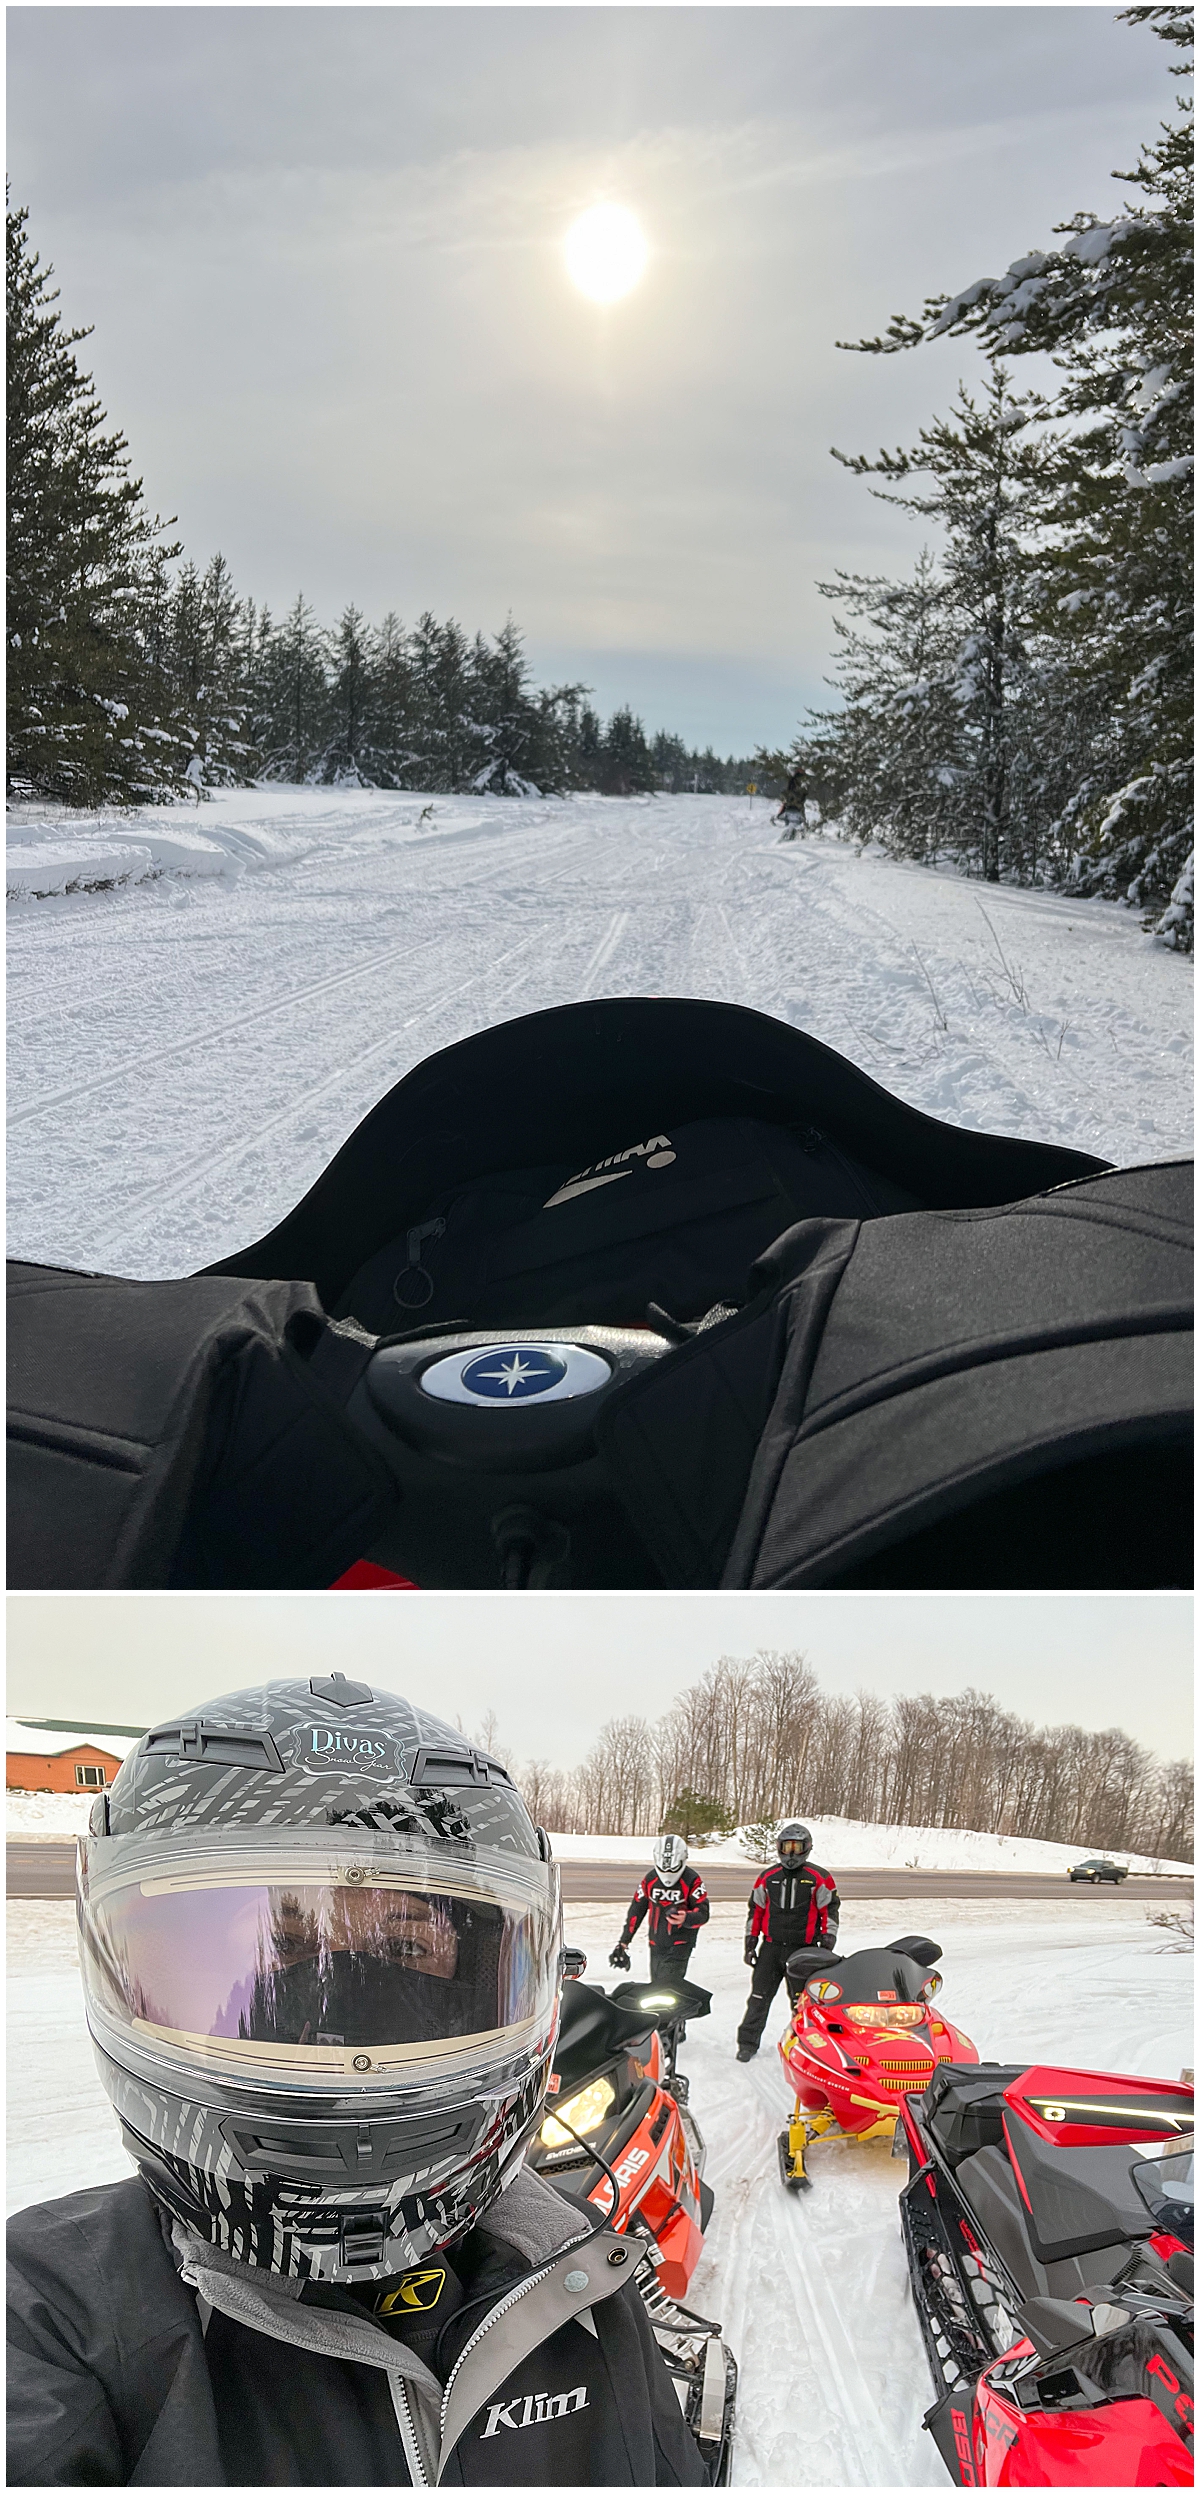 Snowmobile trip with friends